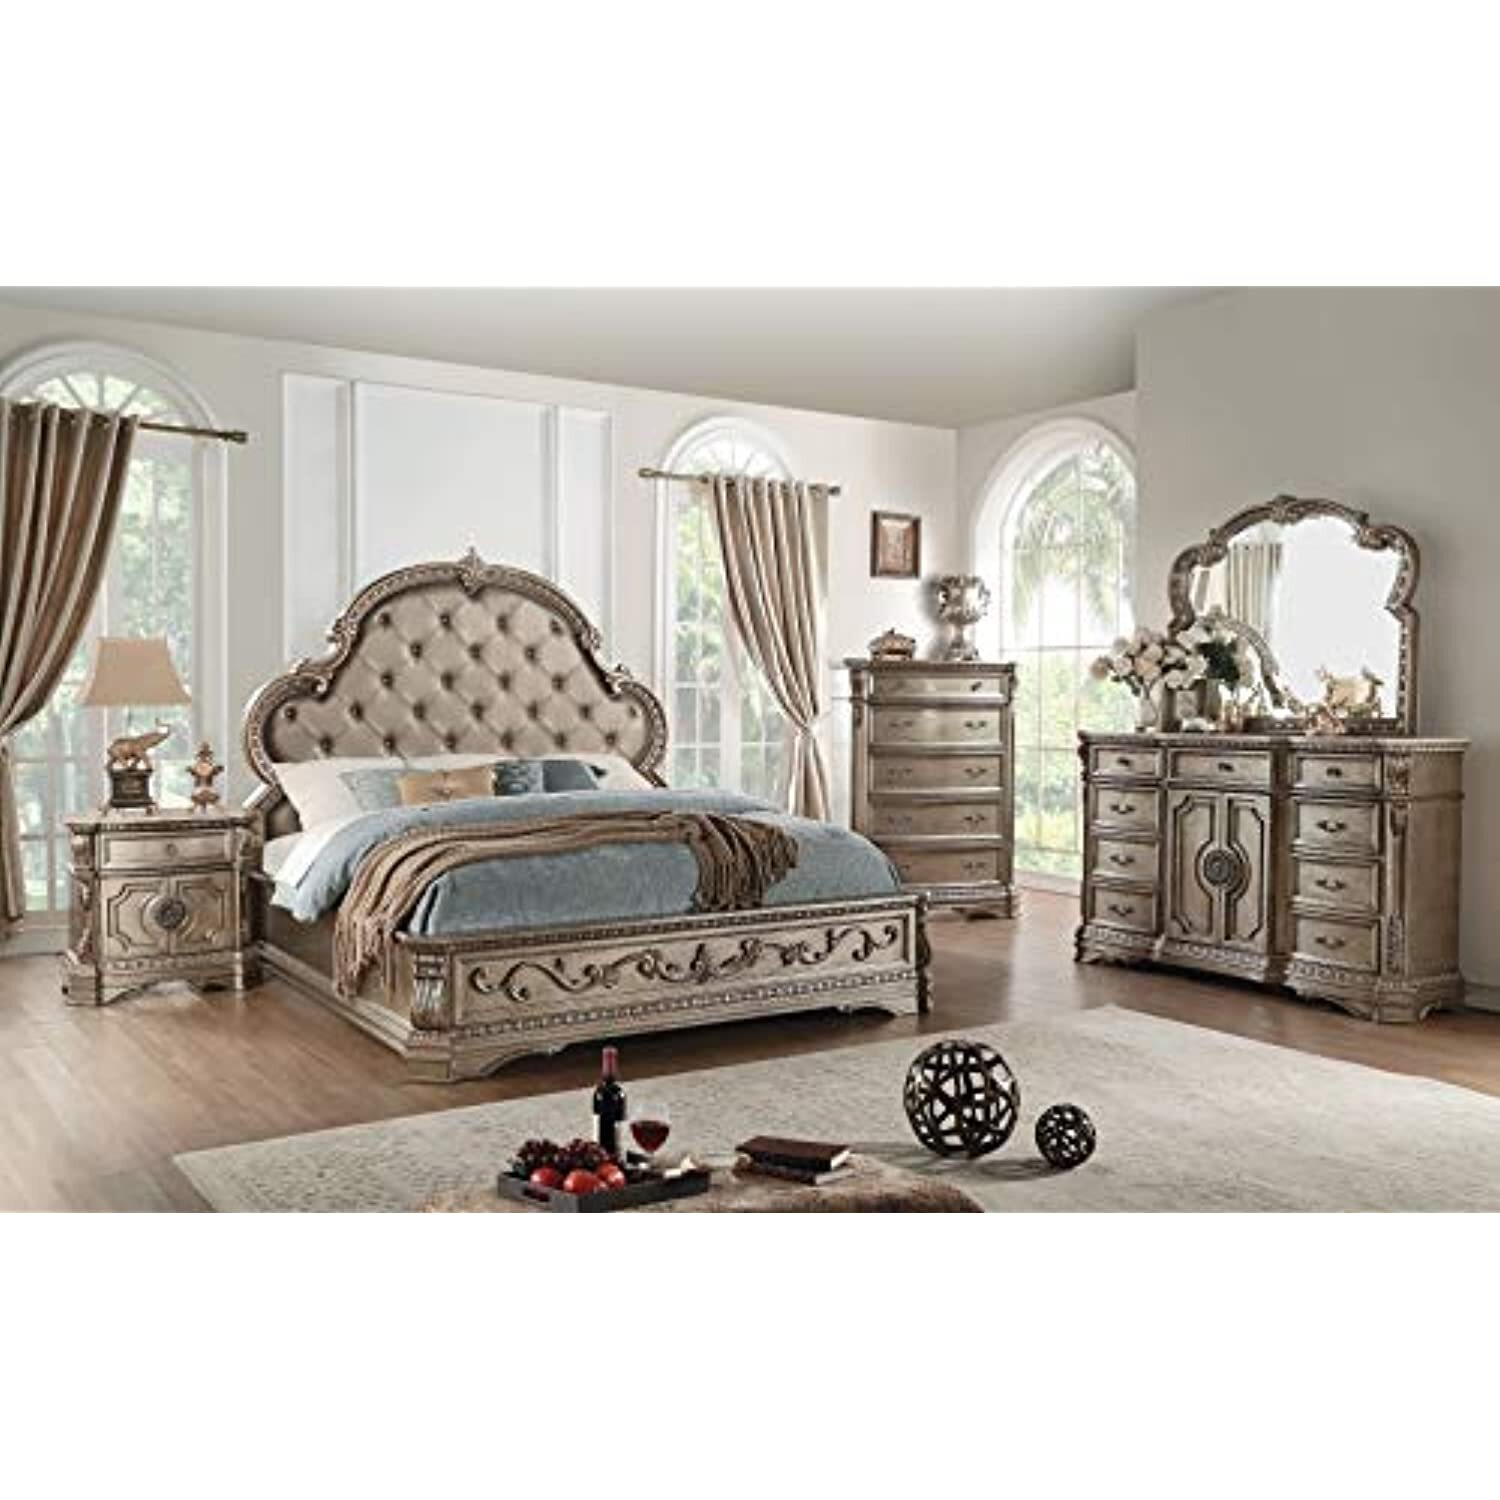 ACME Northville Bed in Antique Silver Finish, Multiple Sizes - image 1 of 2